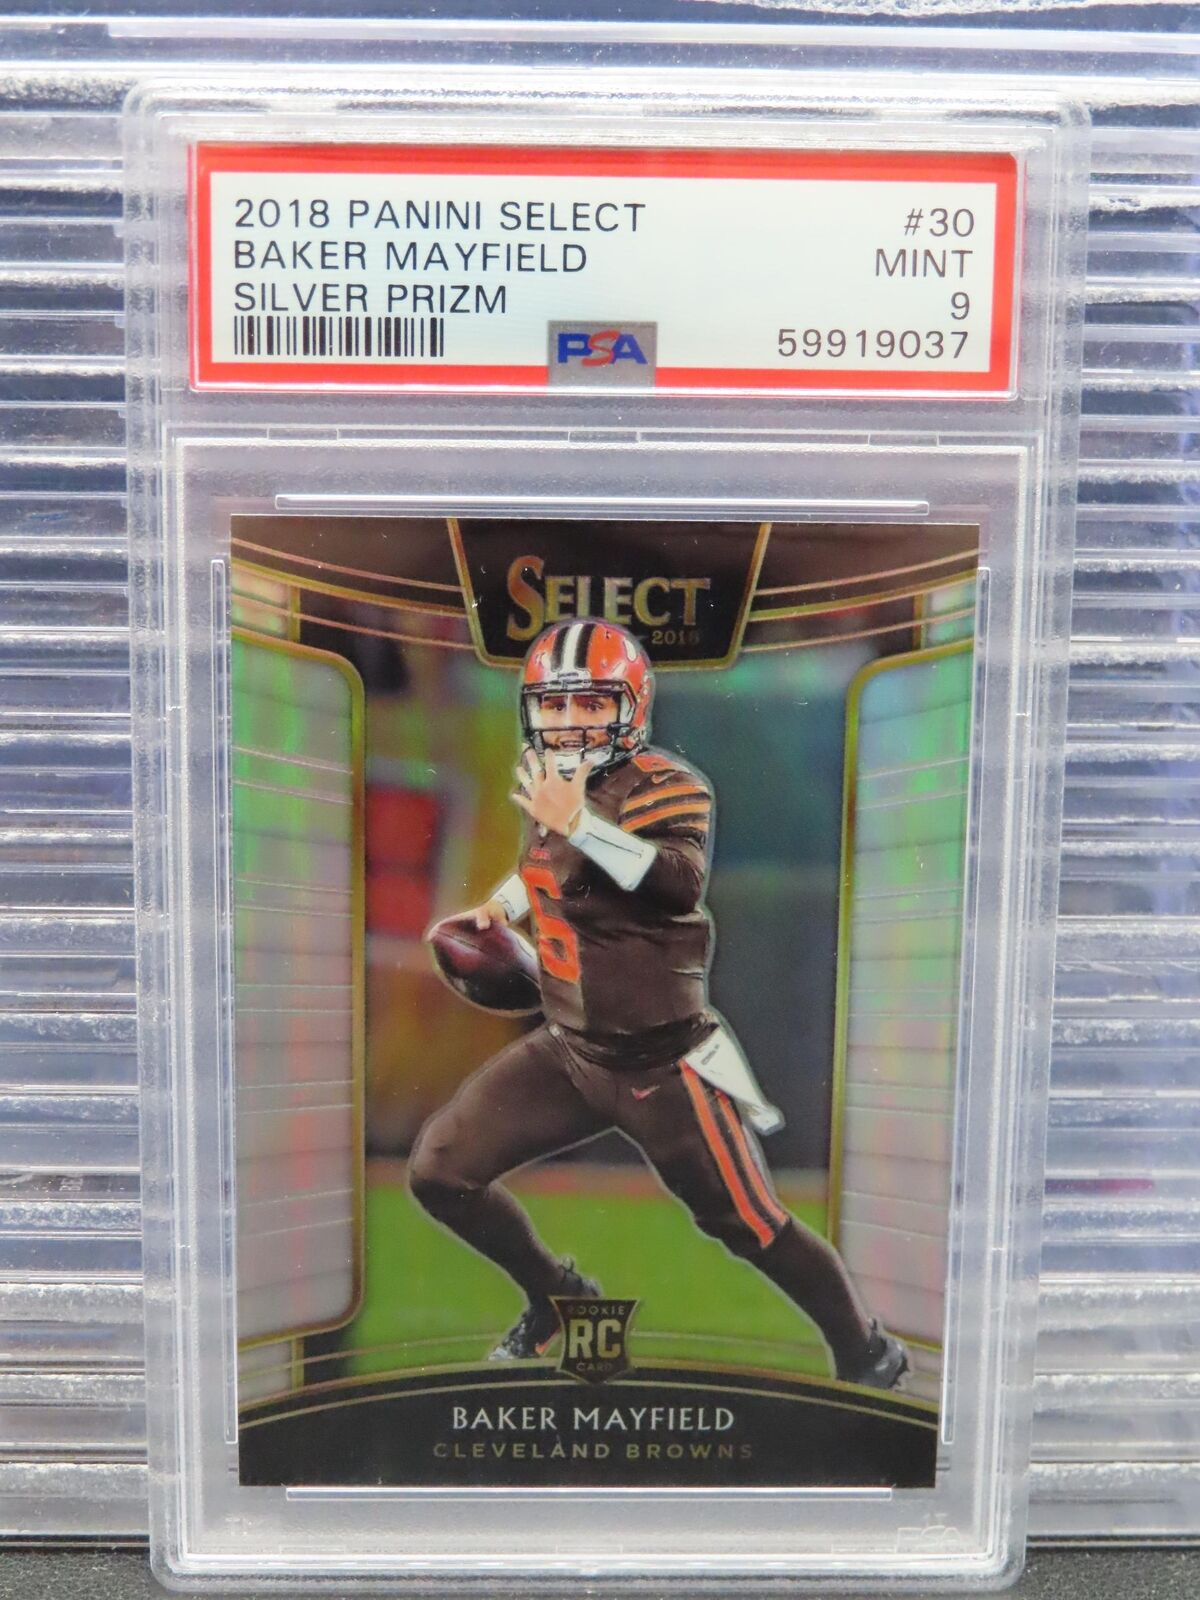 2018 Select Baker Mayfield Concourse Silver Prizm Rookie RC #30 PSA 9 Browns